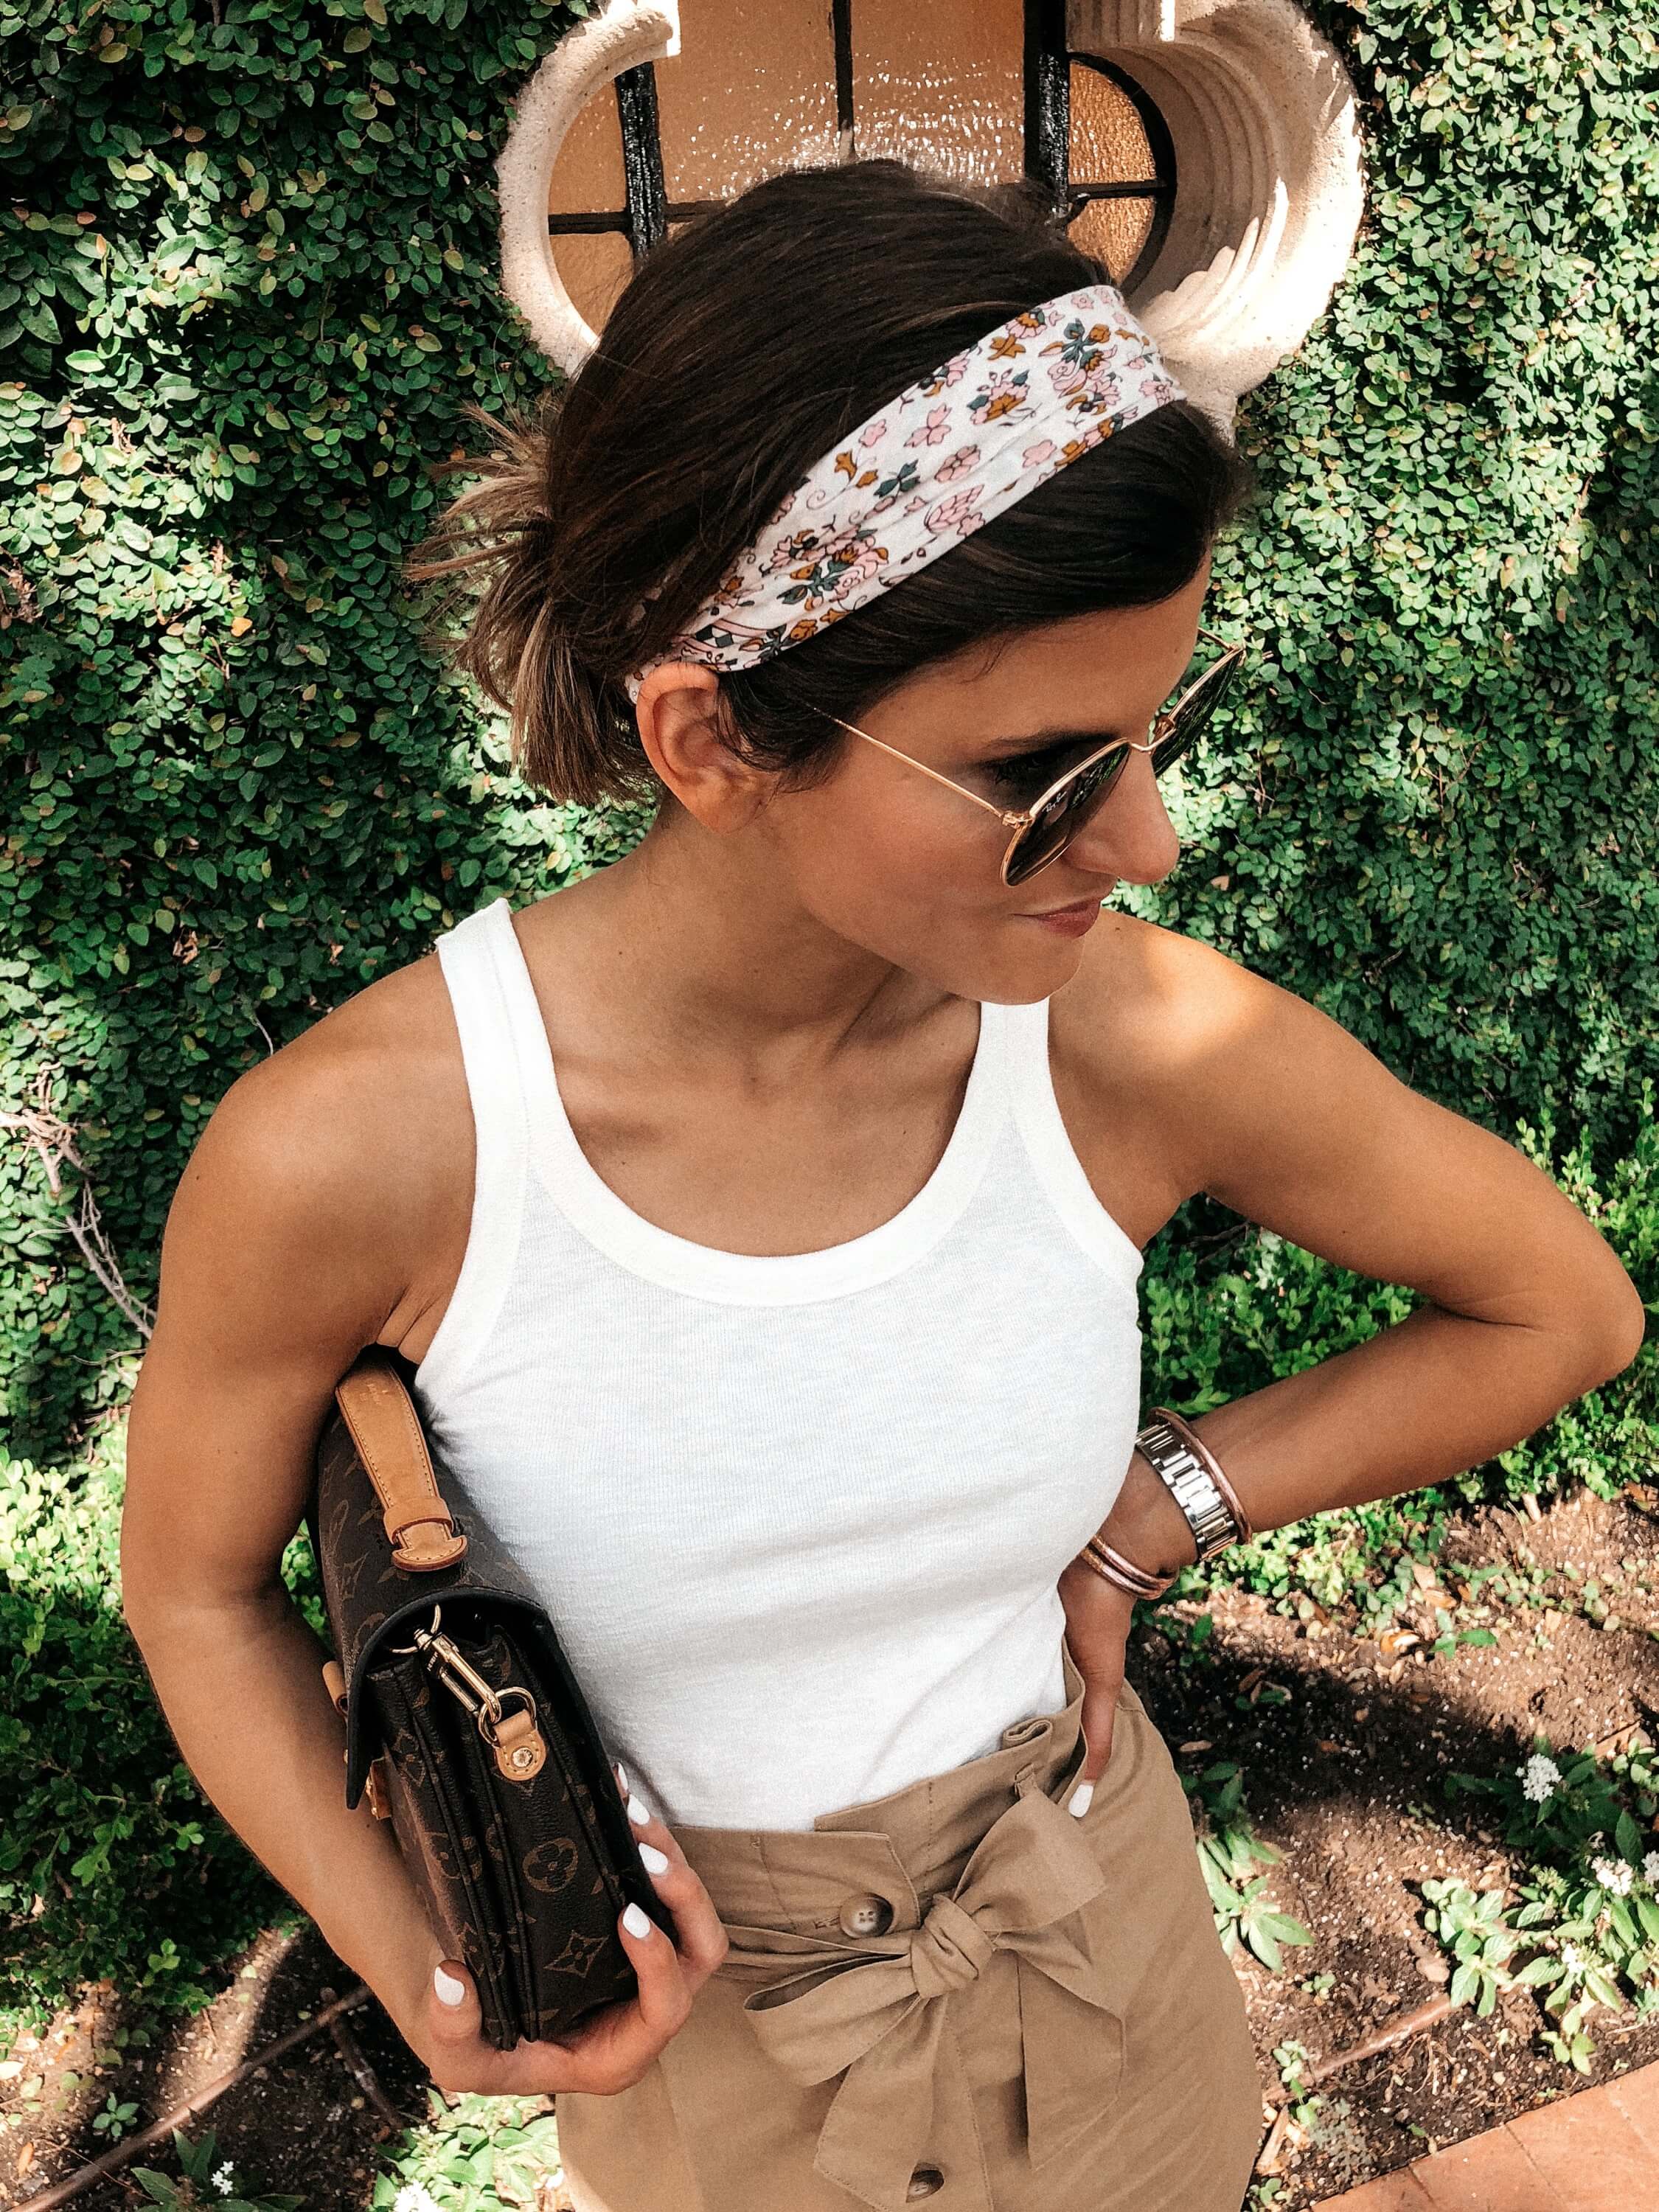 ydre forfatter vitalitet Ways To Wear a Bandana: 5+ Cute Ways To Wear a Bandana